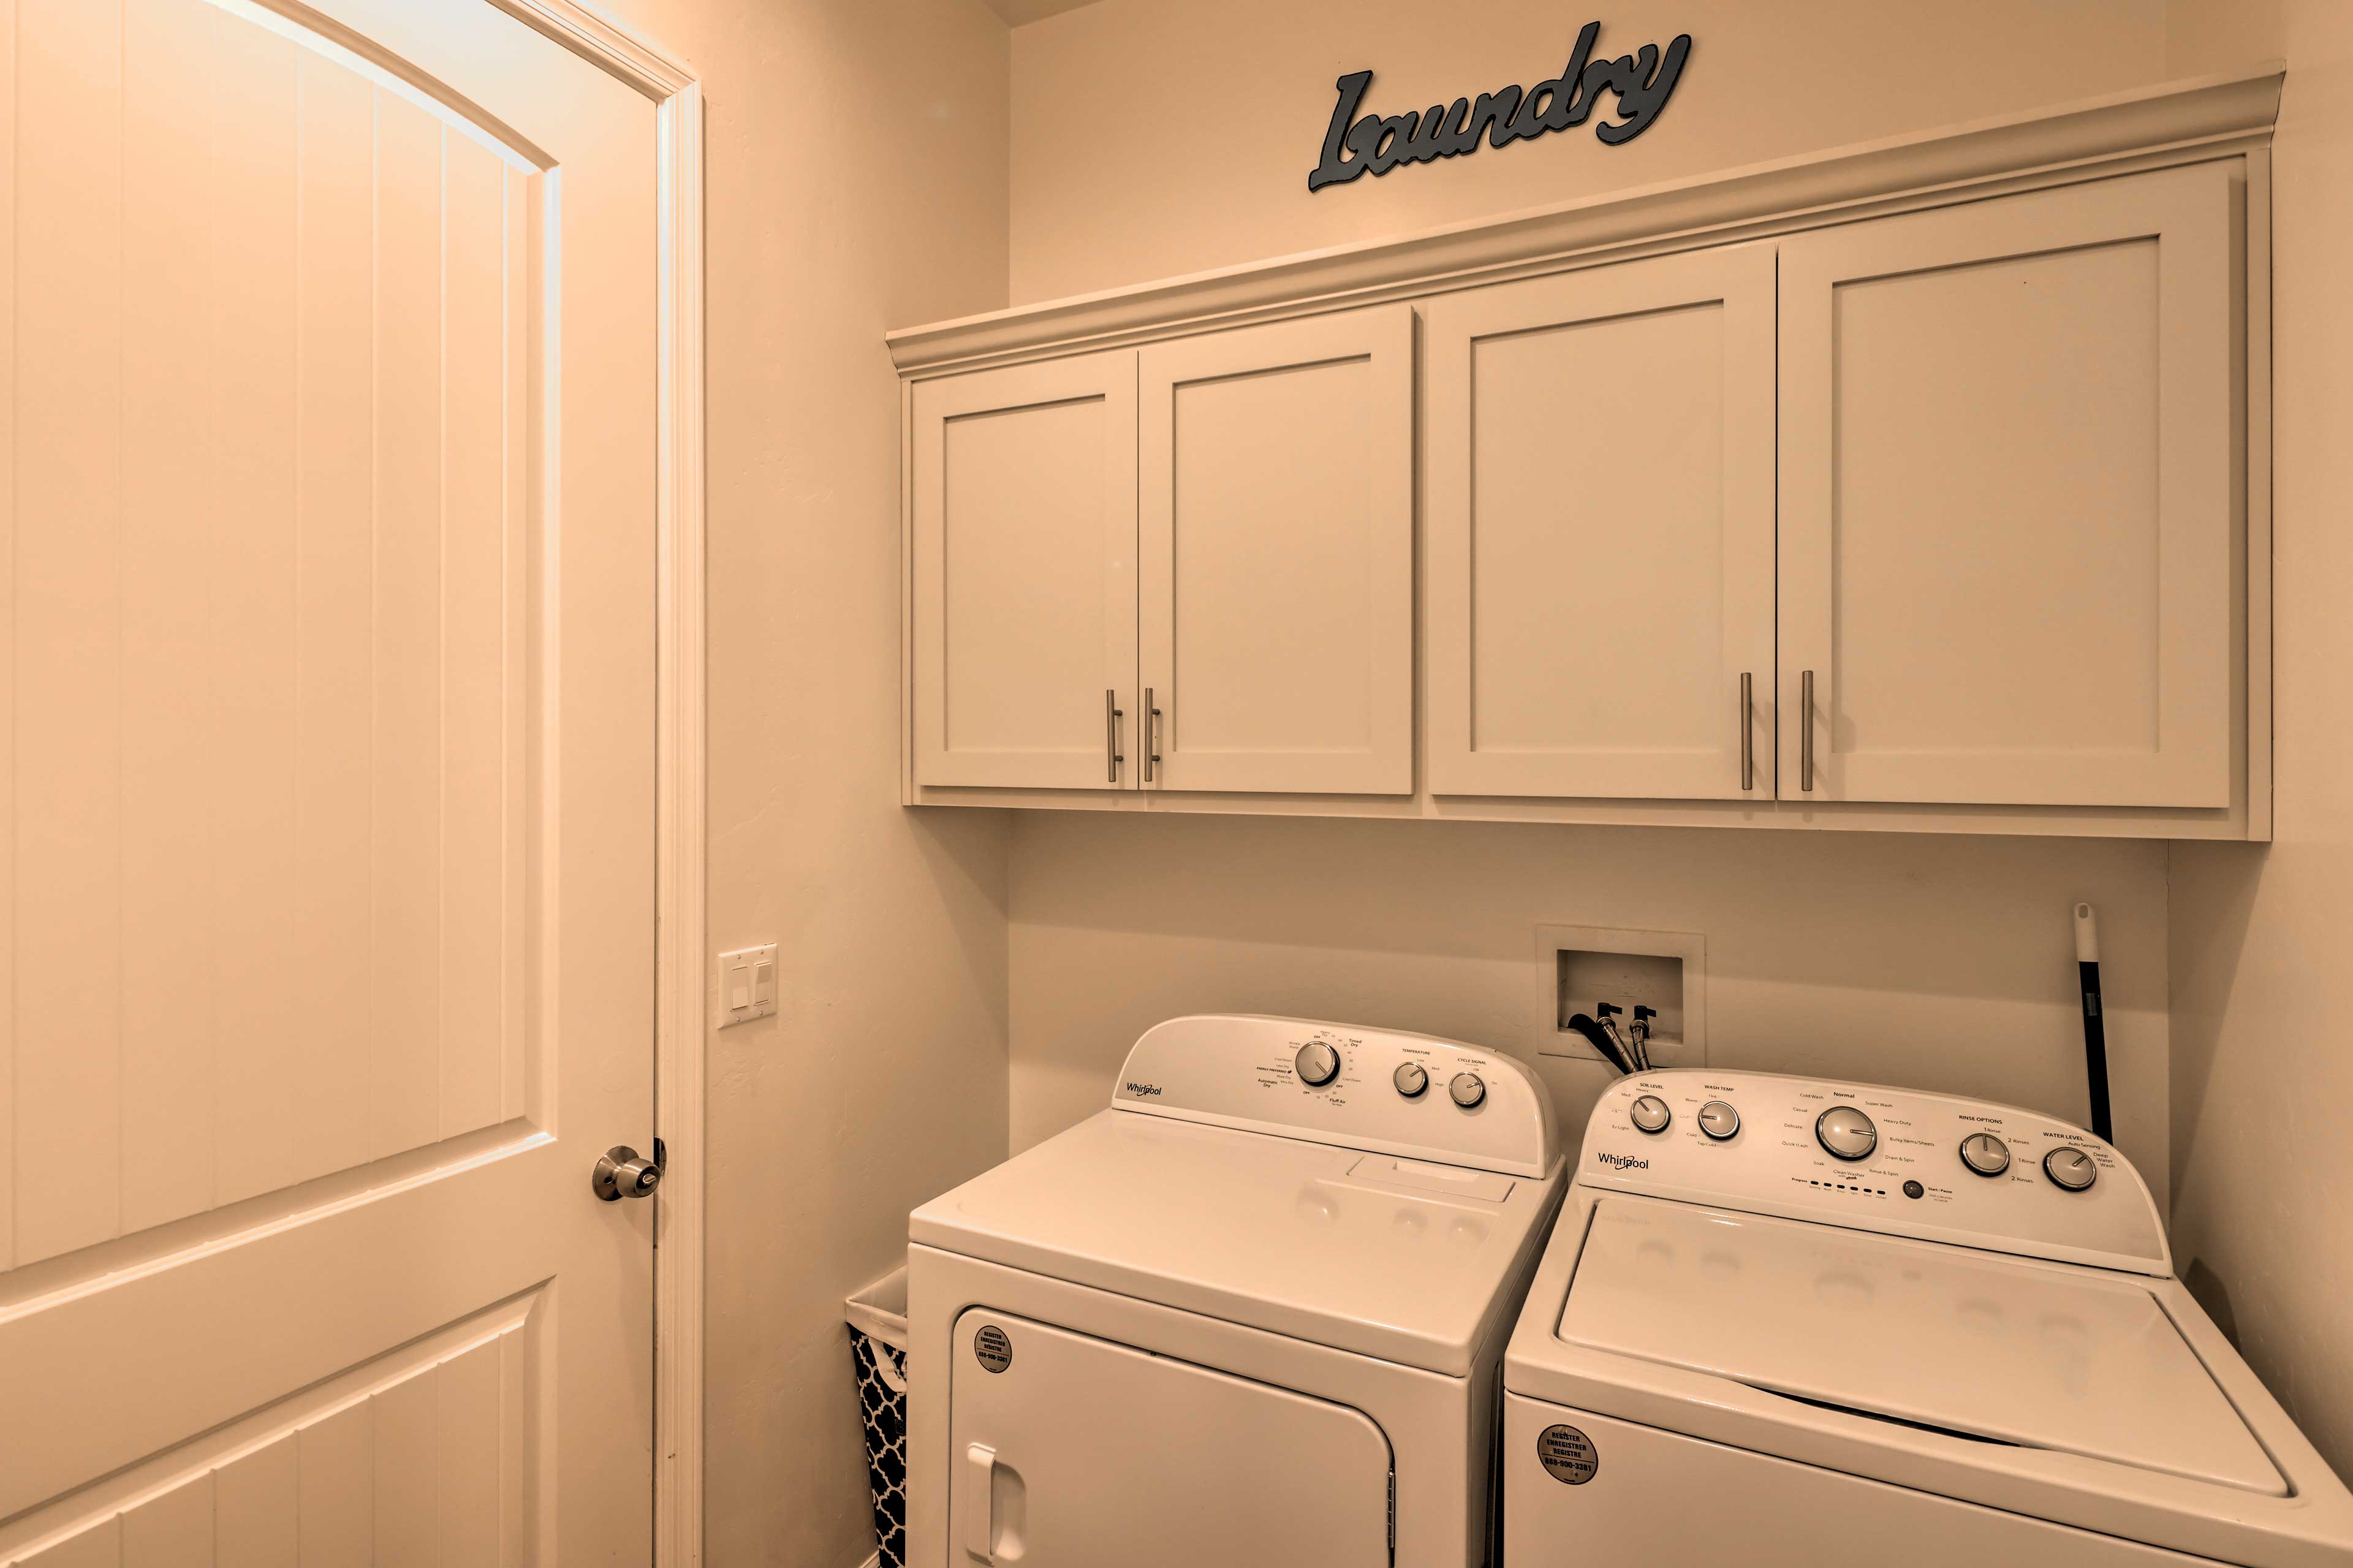 Laundry Room | Laundry Detergent | Iron & Board | Hangers